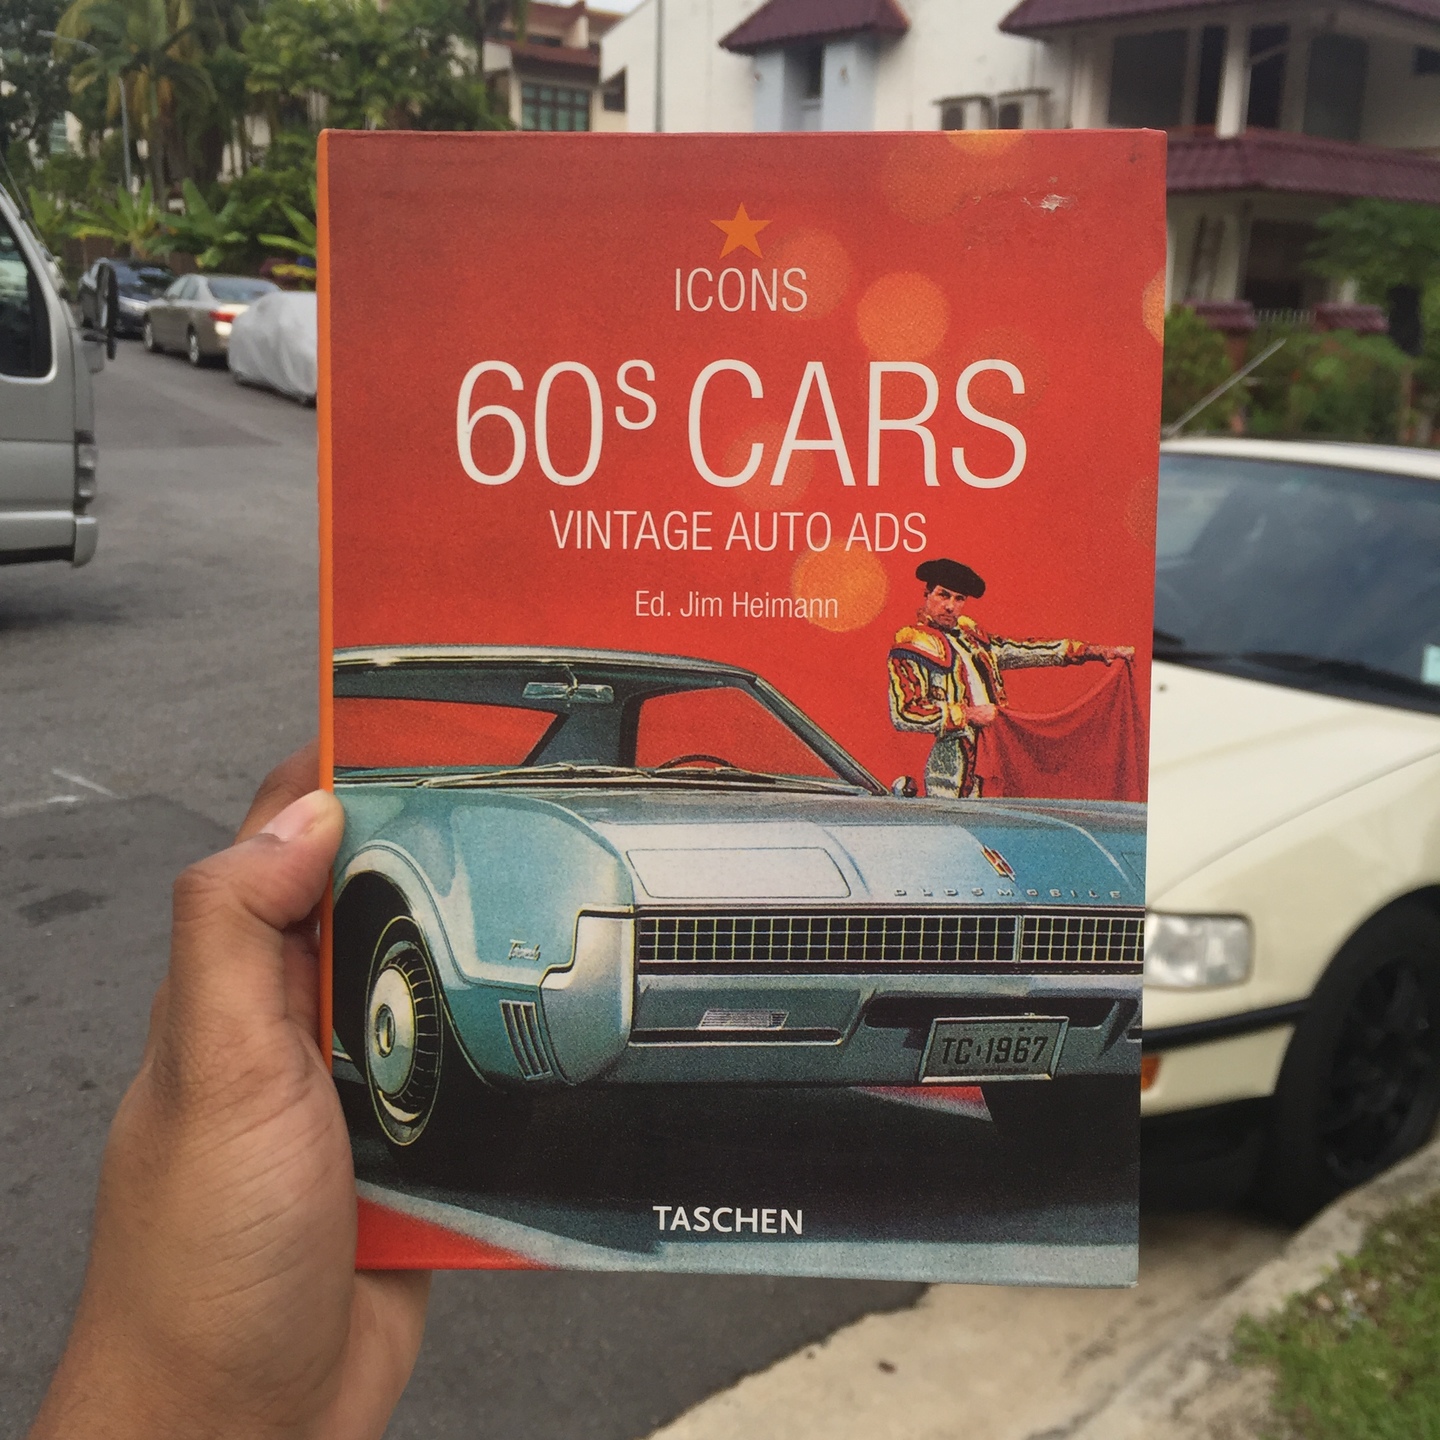 60s Cars: Vintage Auto Ads edited by Jim Heimann [Paperback]